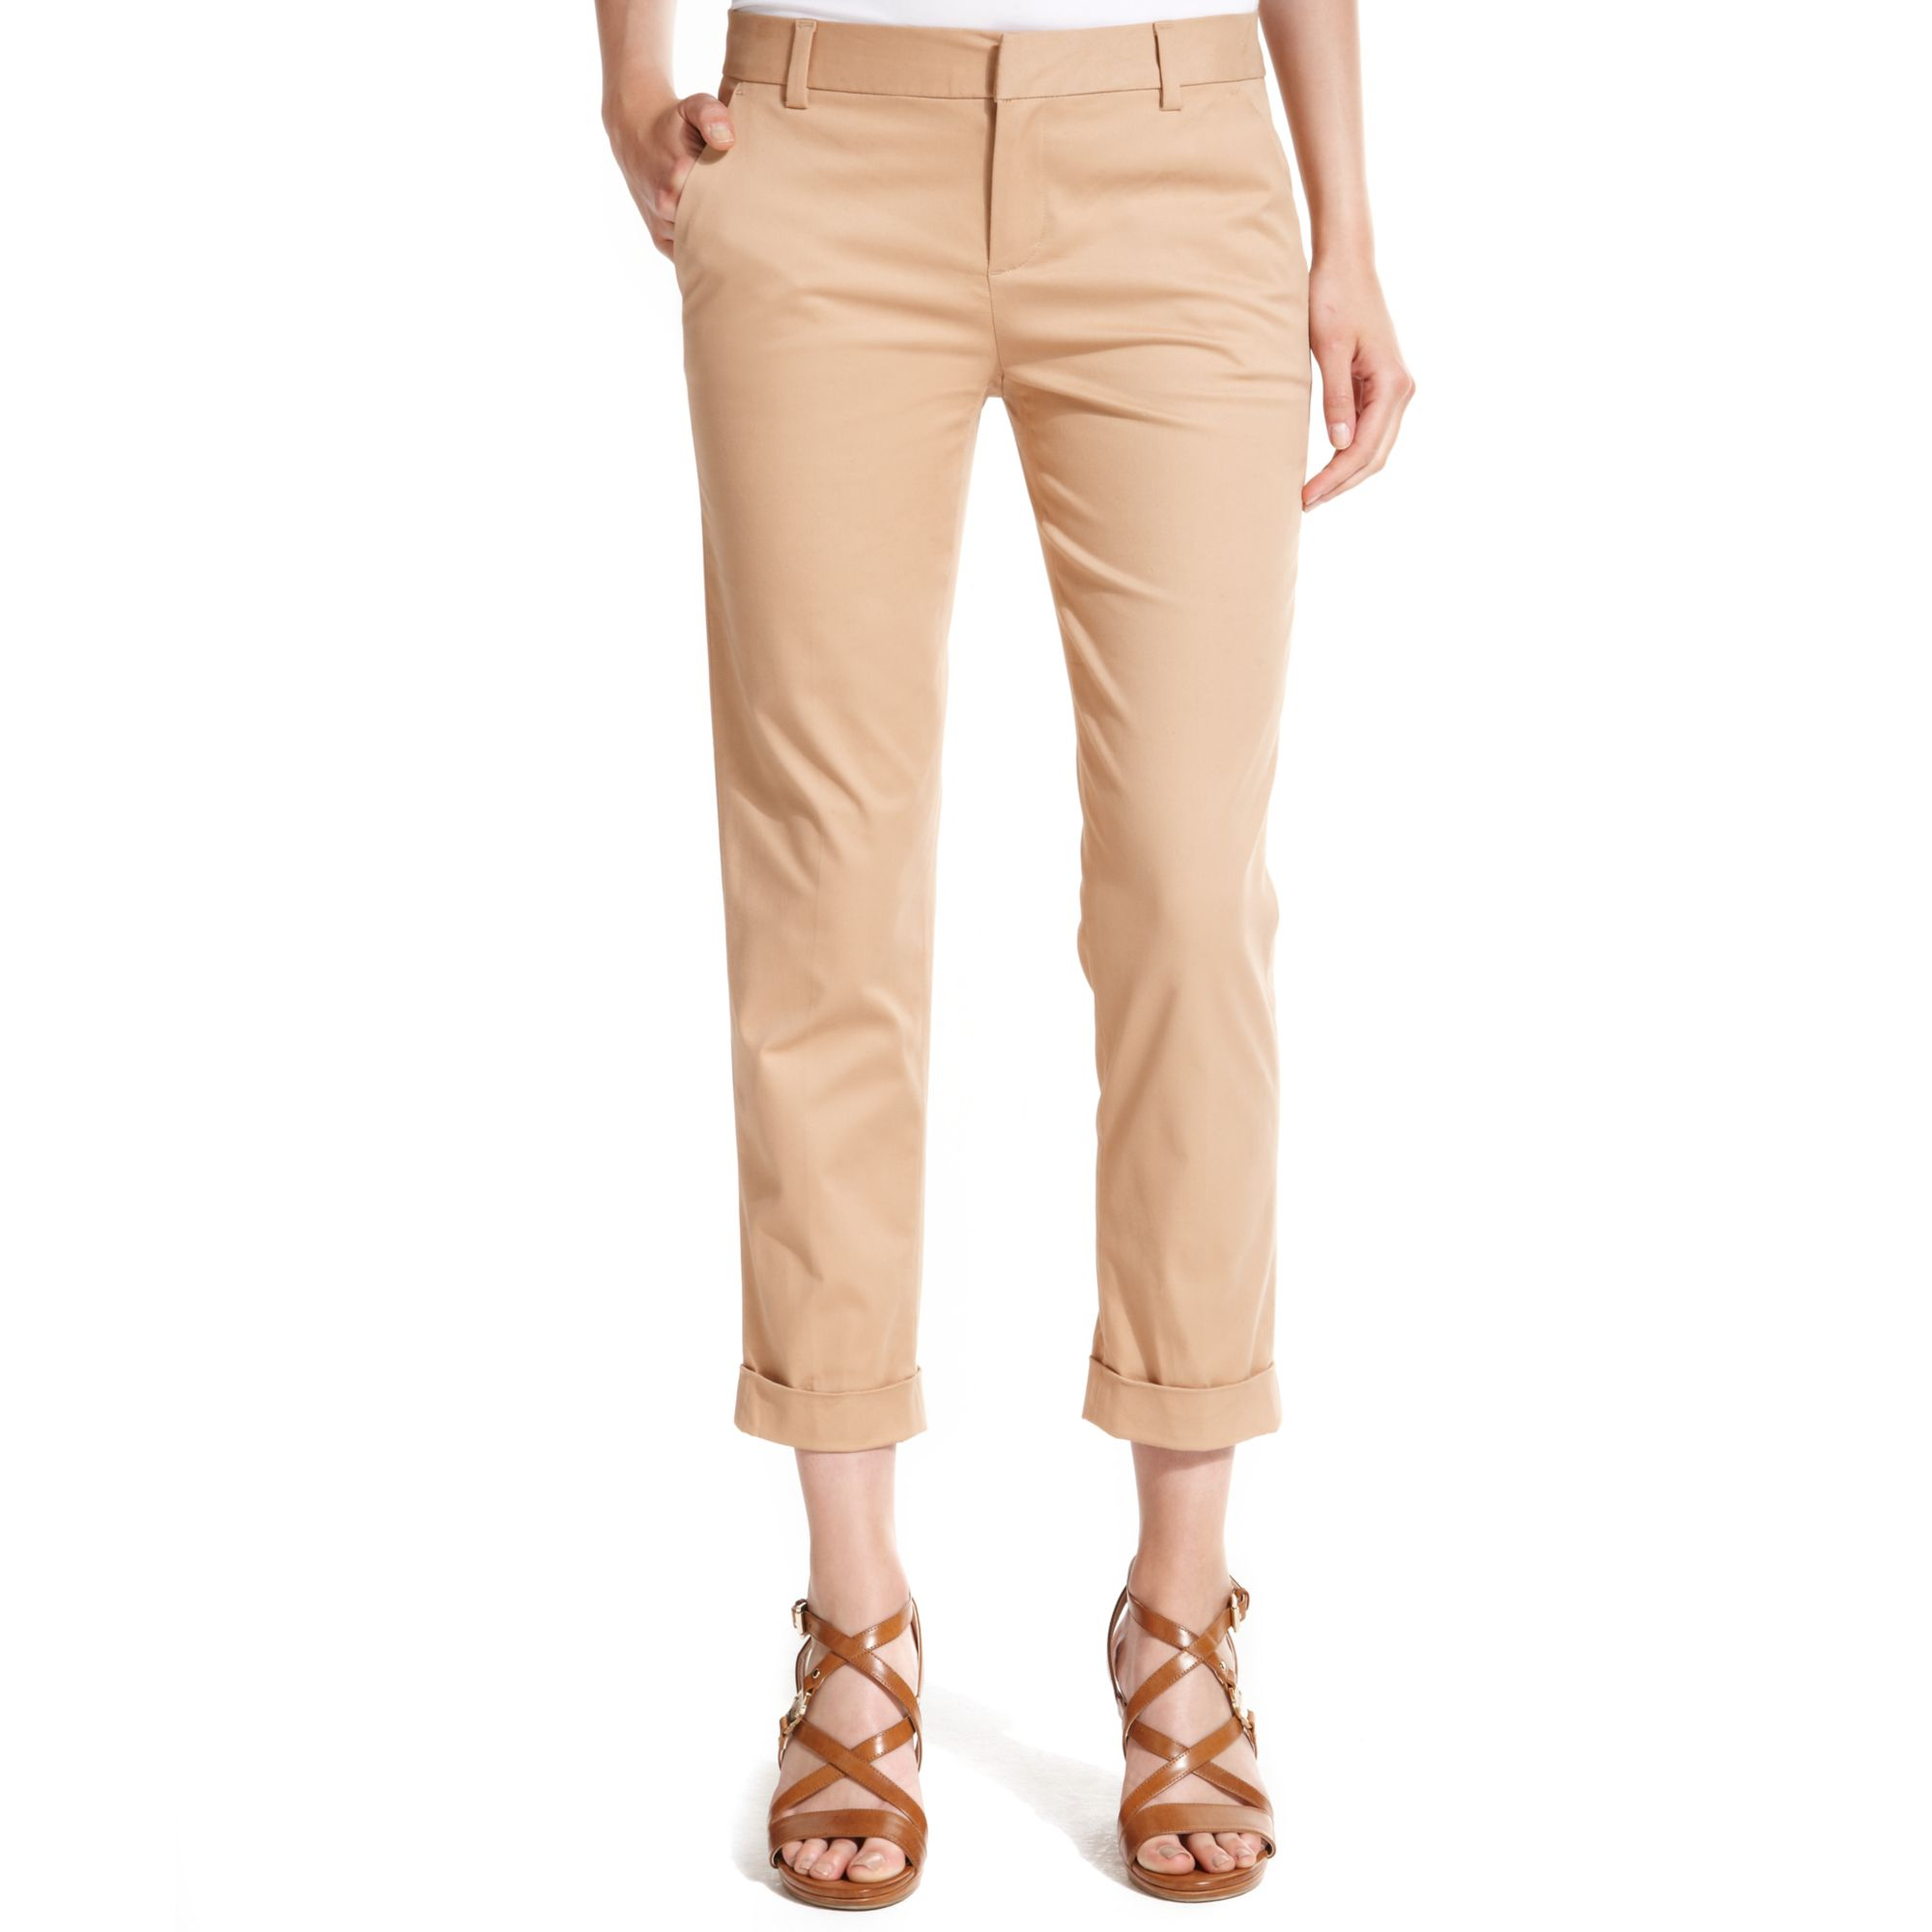 Lyst - Tommy Hilfiger Straight-leg Cuffed Cropped Pants in Natural